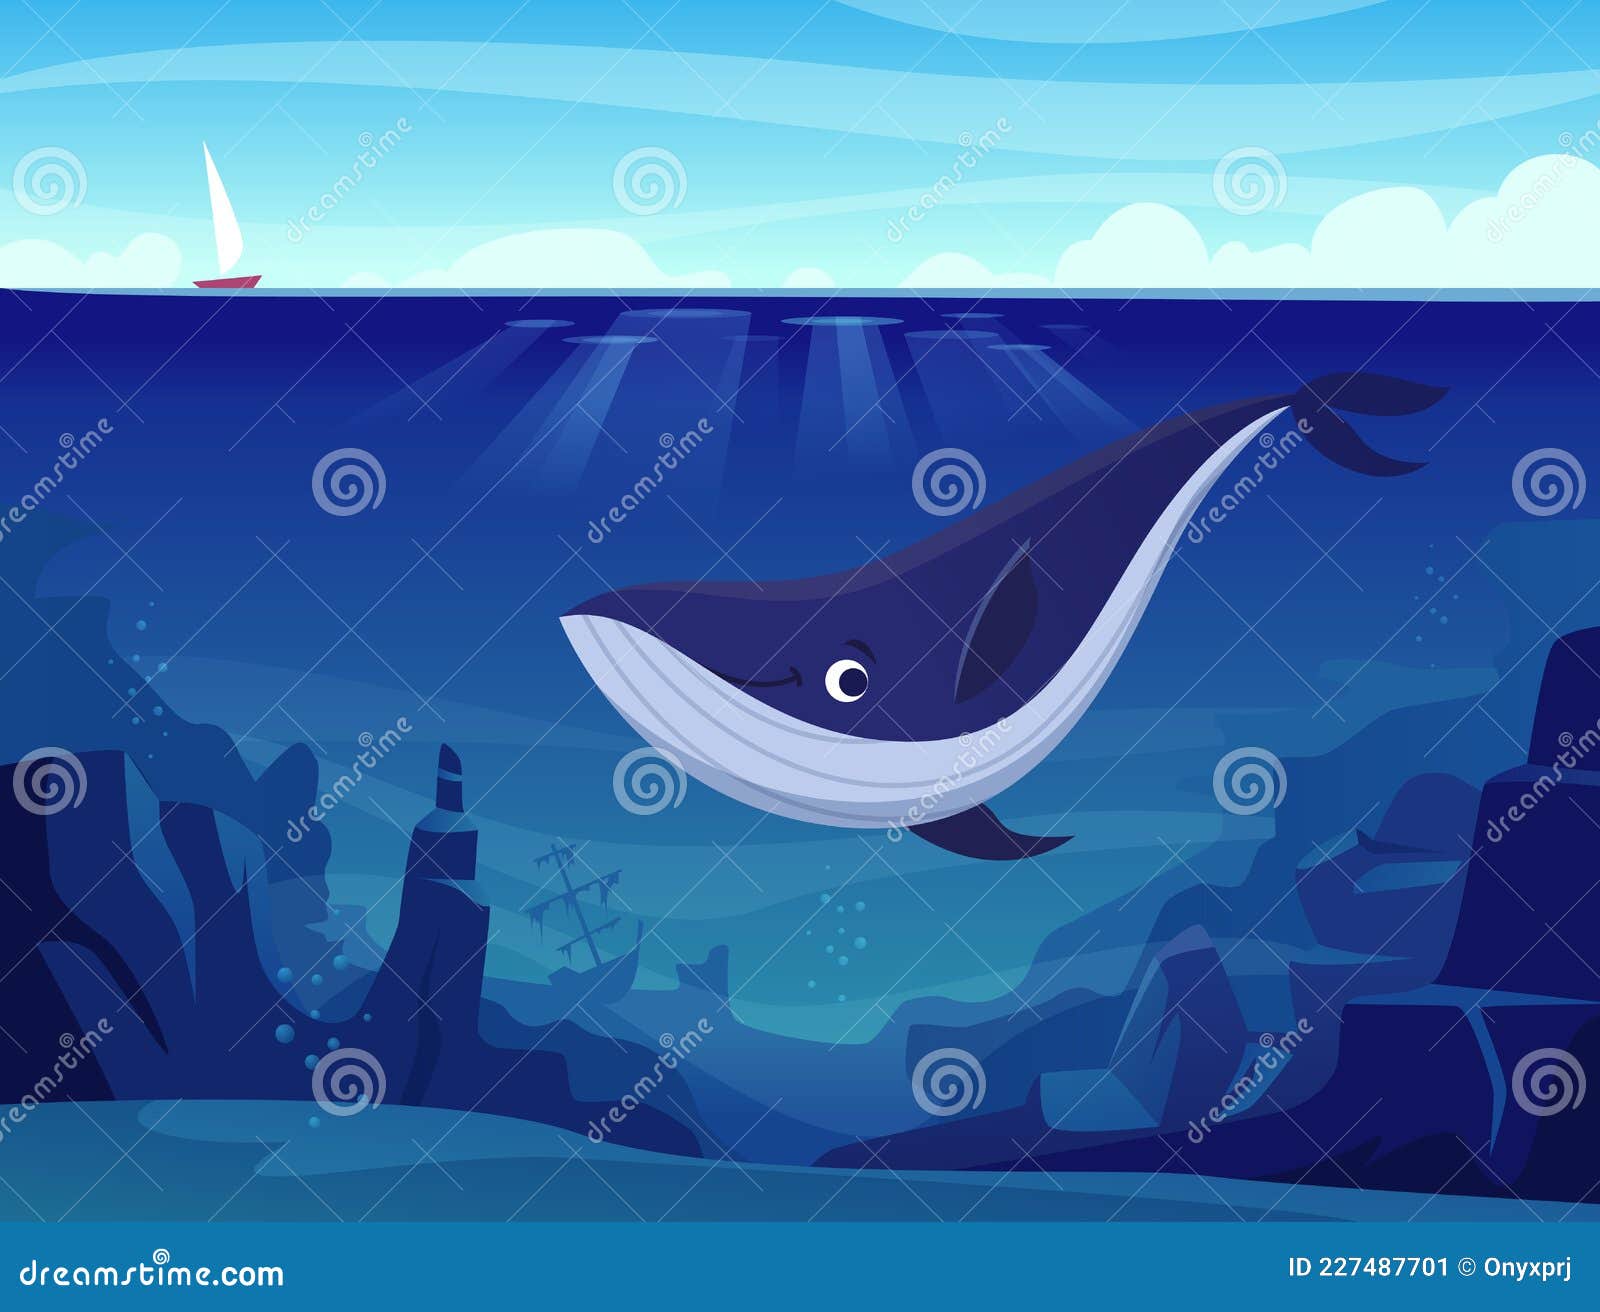 Underwater Life. Whales and Big Fishes in Ocean Deep Blue Sea Wild Swimming  Animals Exact Vector Cartoon Background Stock Vector - Illustration of  background, creature: 227487701